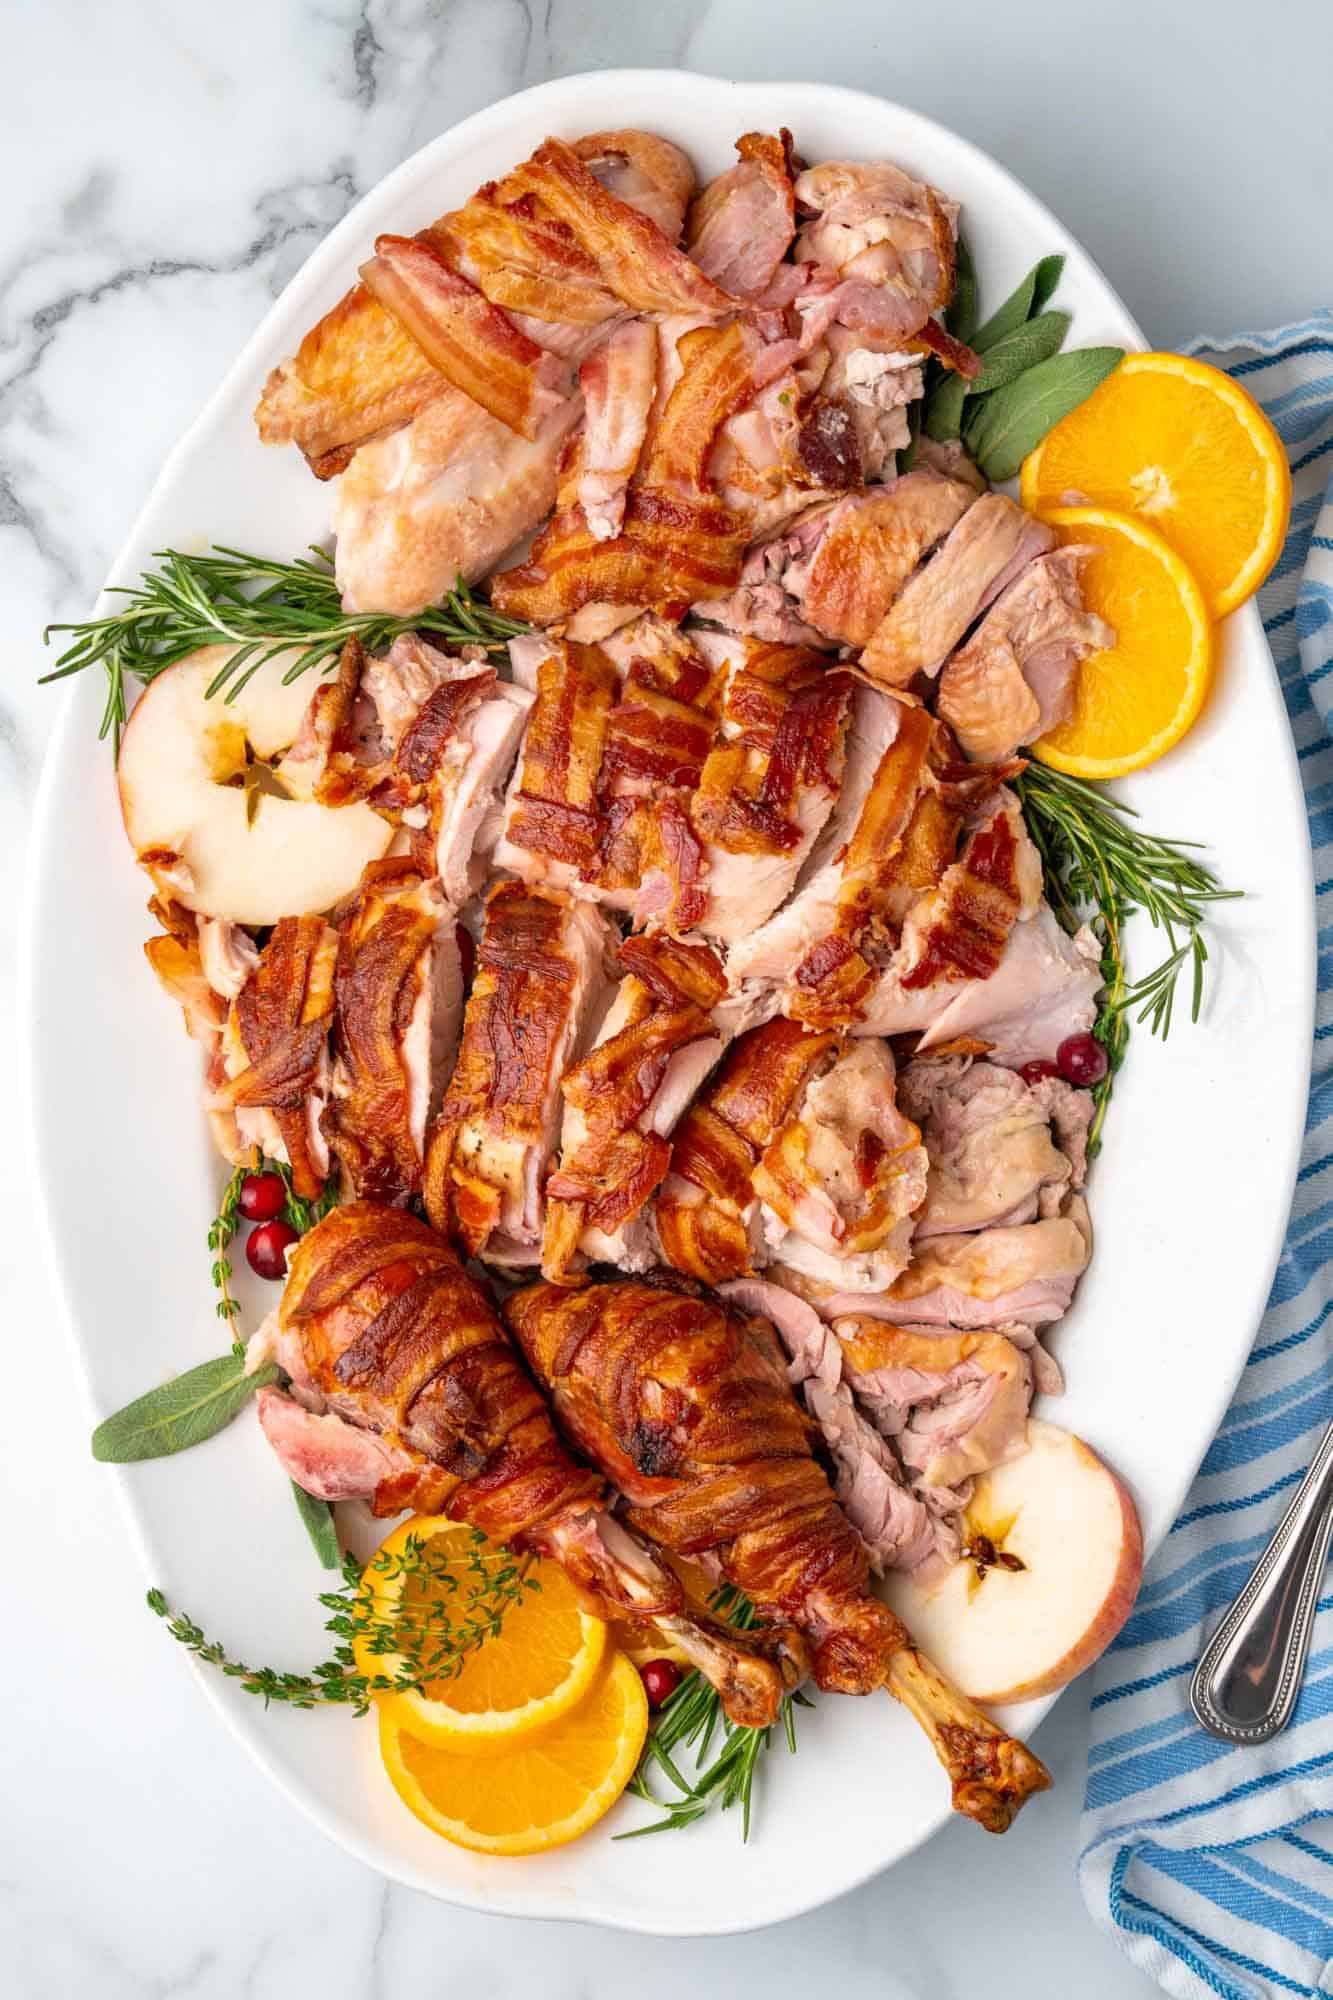 a large platter lined with herbs and fruit slices. A bacon wrapped turkey that has been carved sits on top.